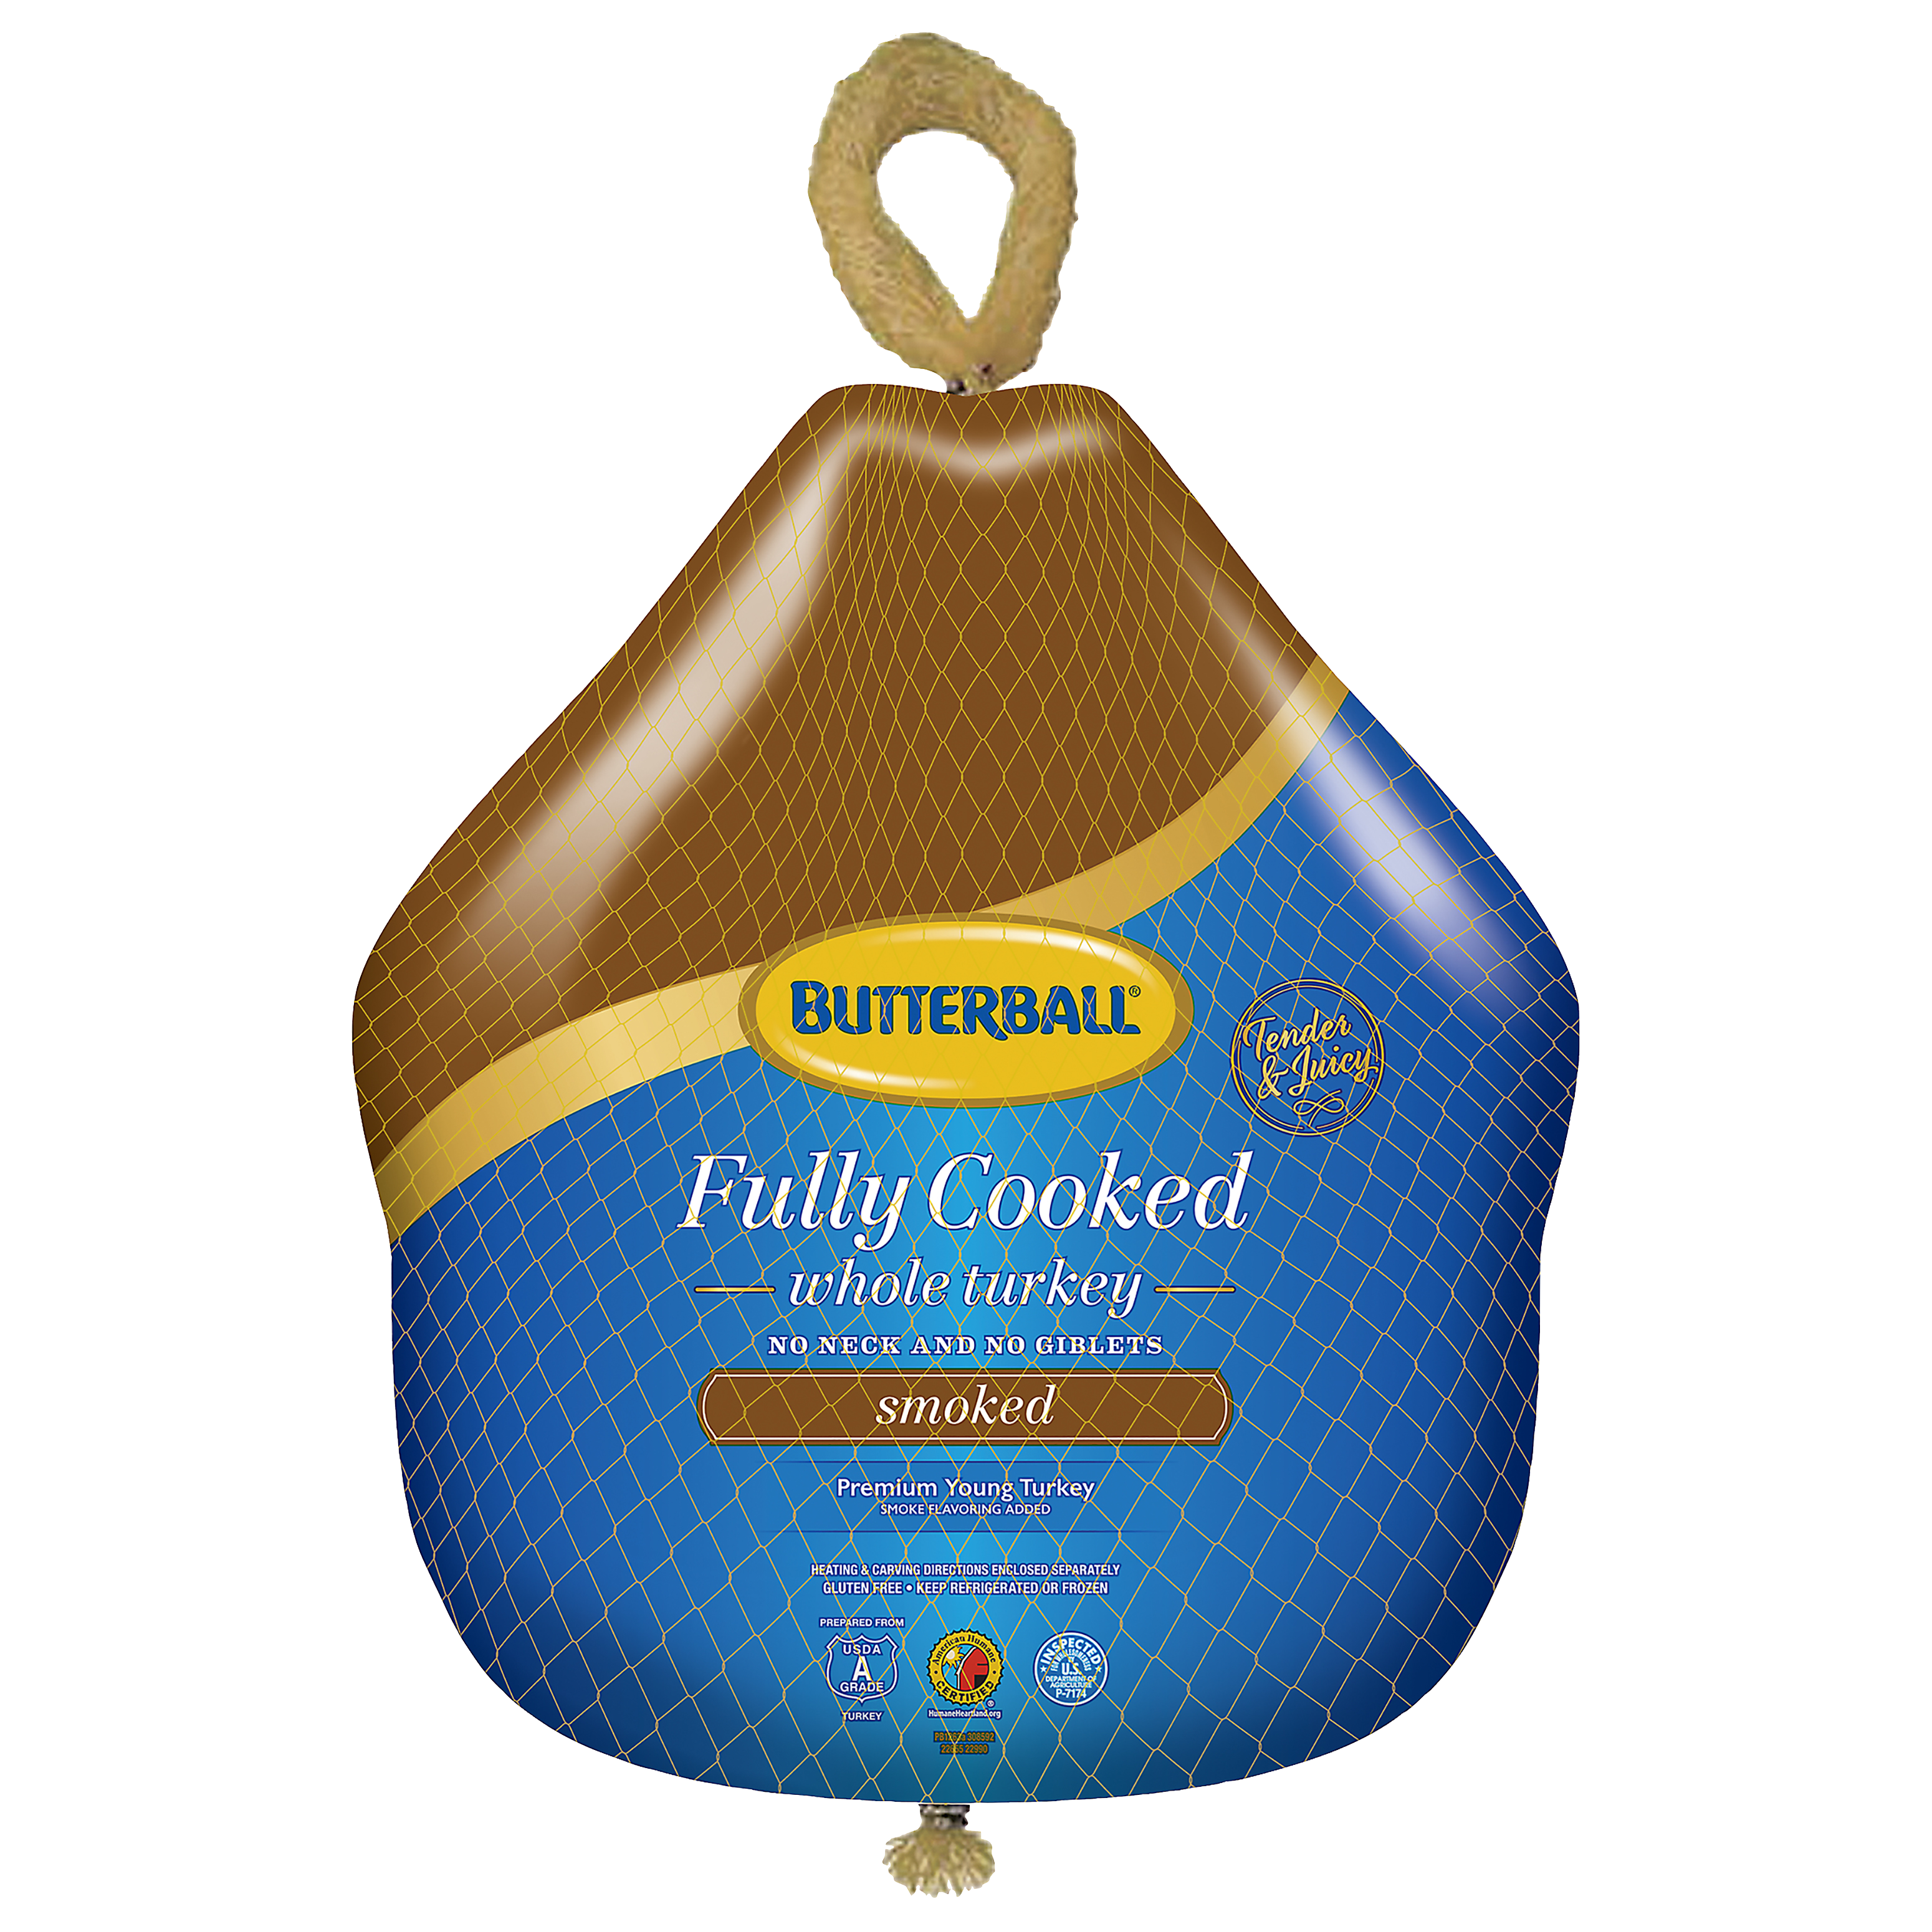 https://www.butterball.com/sites/butterball/files/2022-10/Butterball_Whole-Turkey_00022655229902_CF_0.png